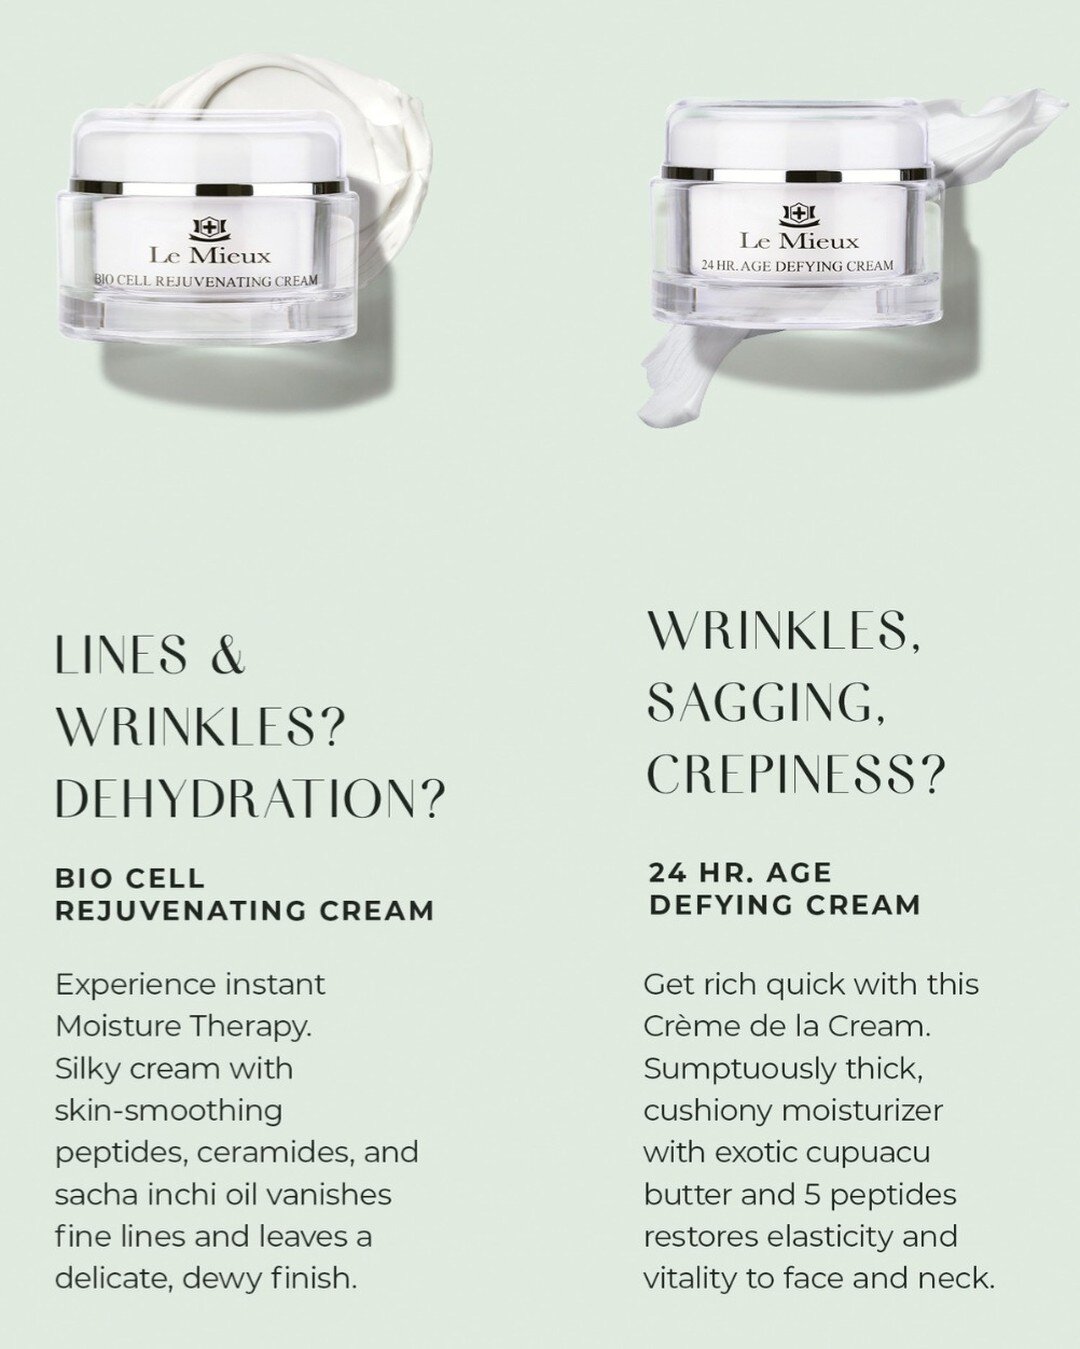 While we're waiting on Spring to save us from the cold, our skin is waiting on some moisture to save us from the cold of February!

Unfamiliar with Le Mieux's moisturizing creams? Check out some facts about our fave two that we use year-round:

- Ins